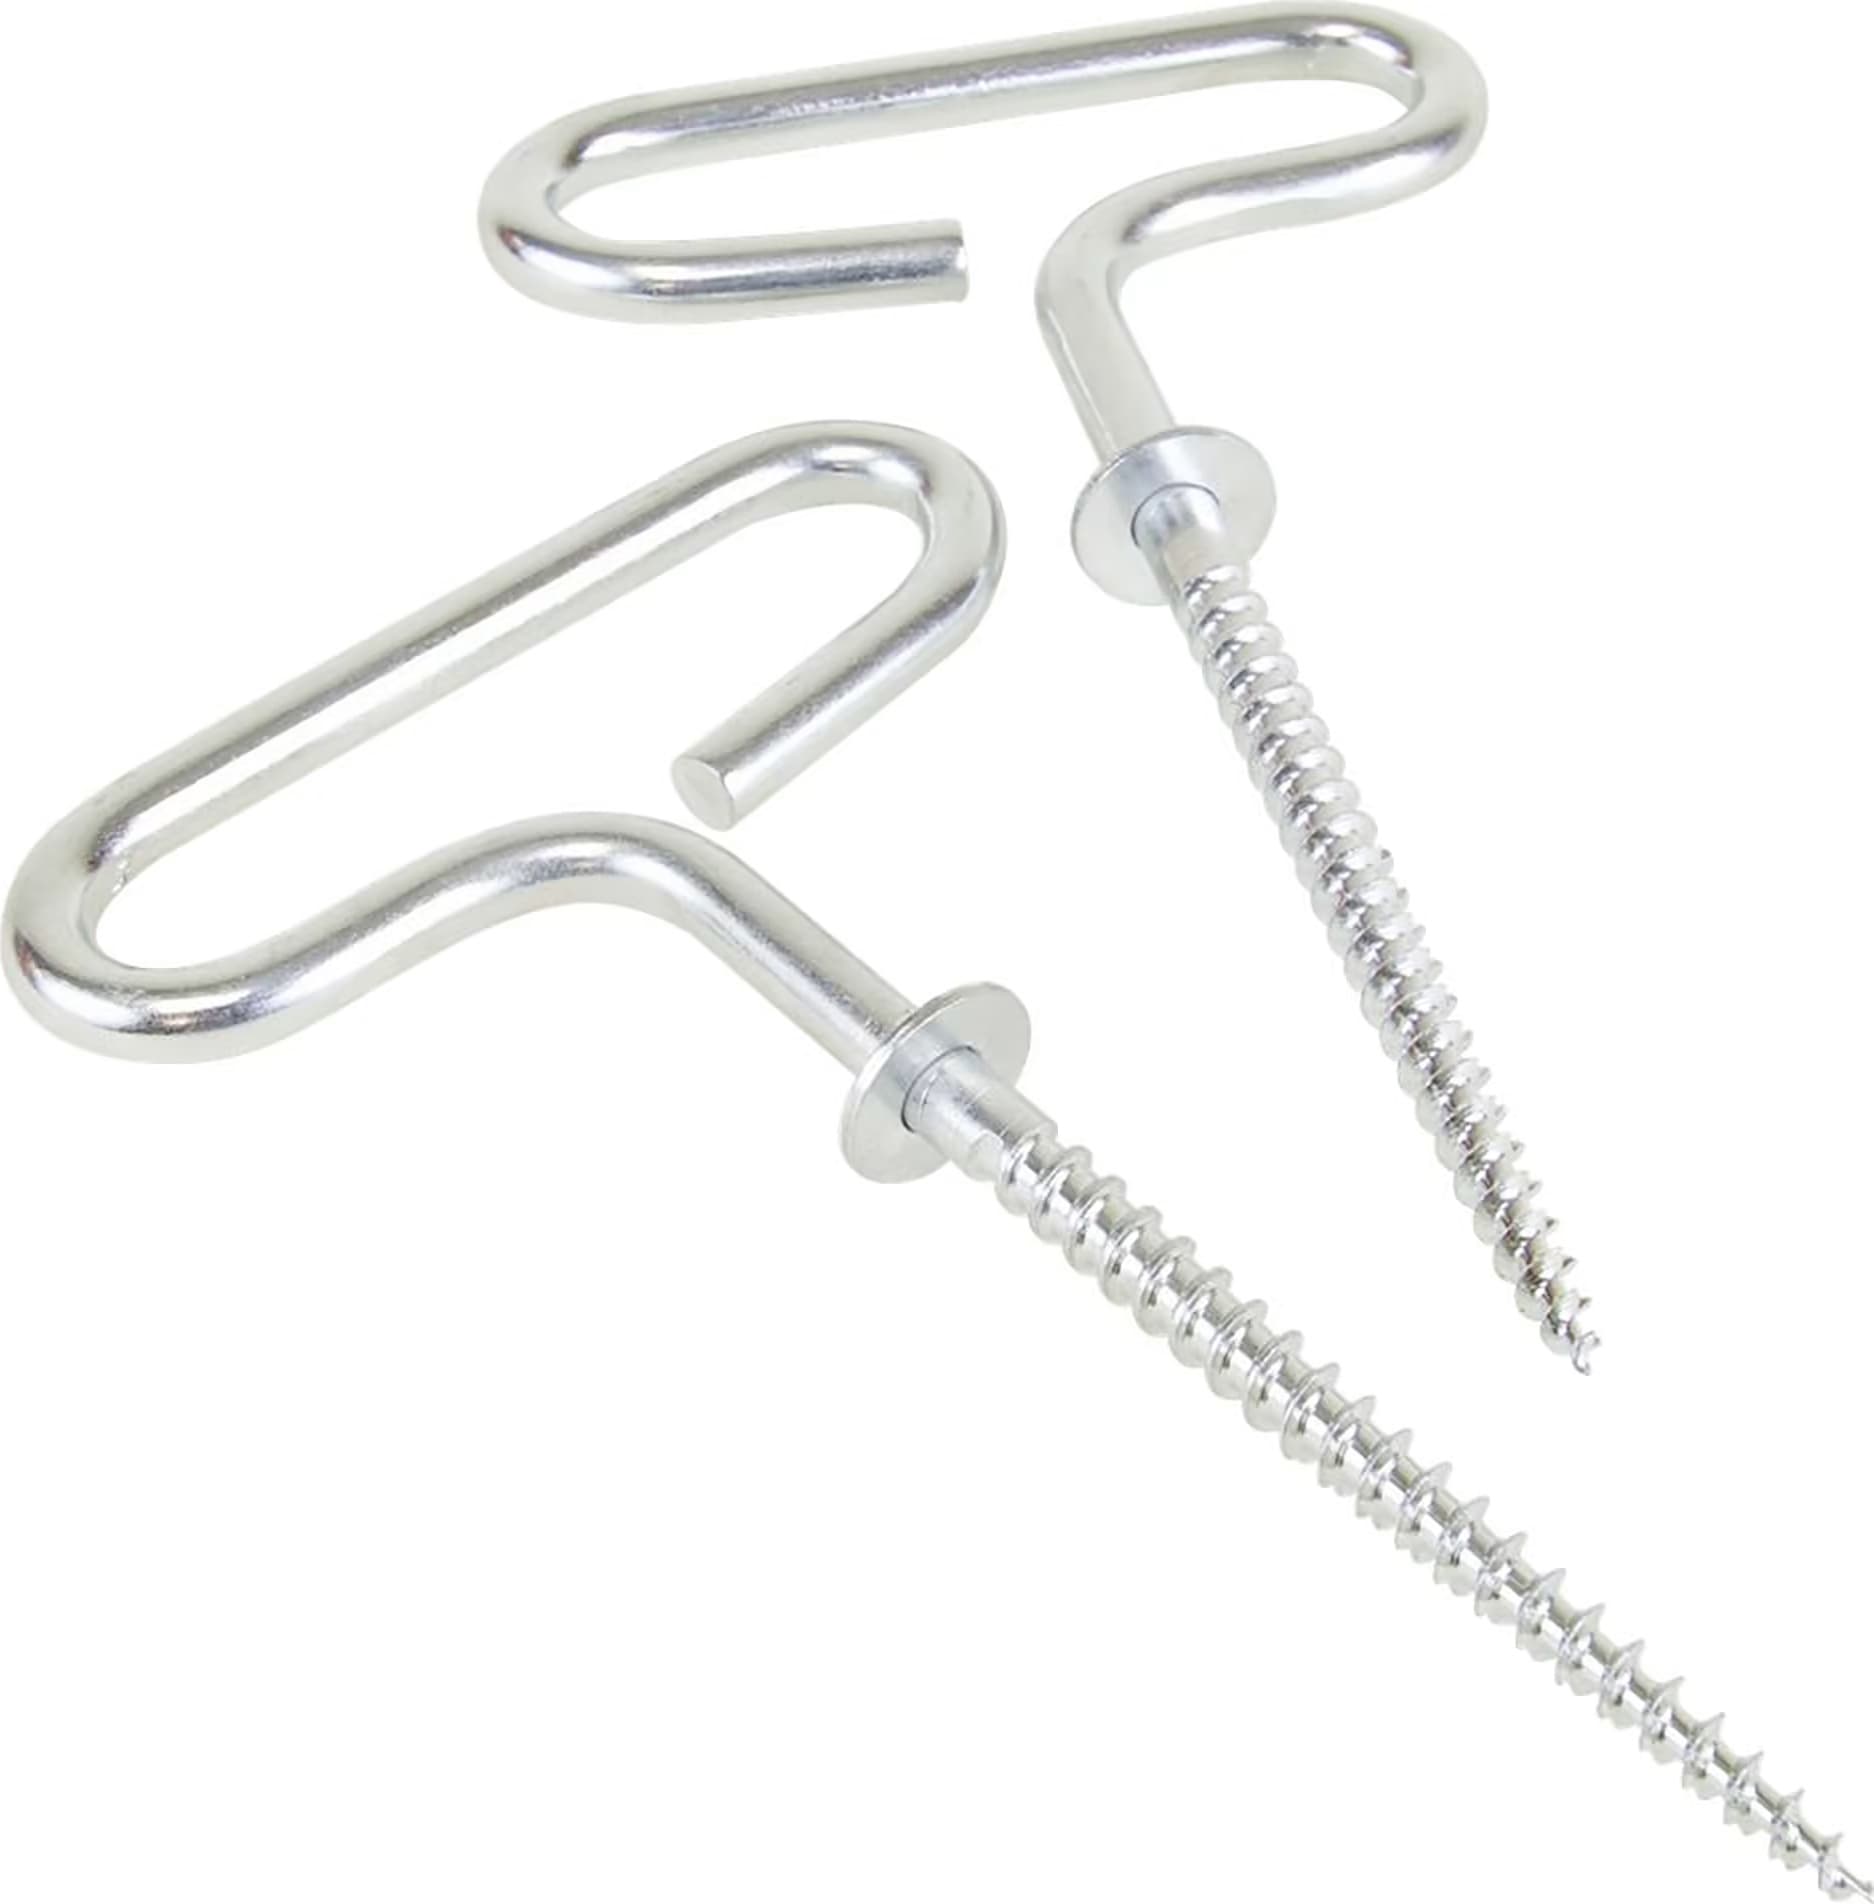 Bass Pro Shops® XPS Heavy-Duty Ice Anchors - 2 Pack